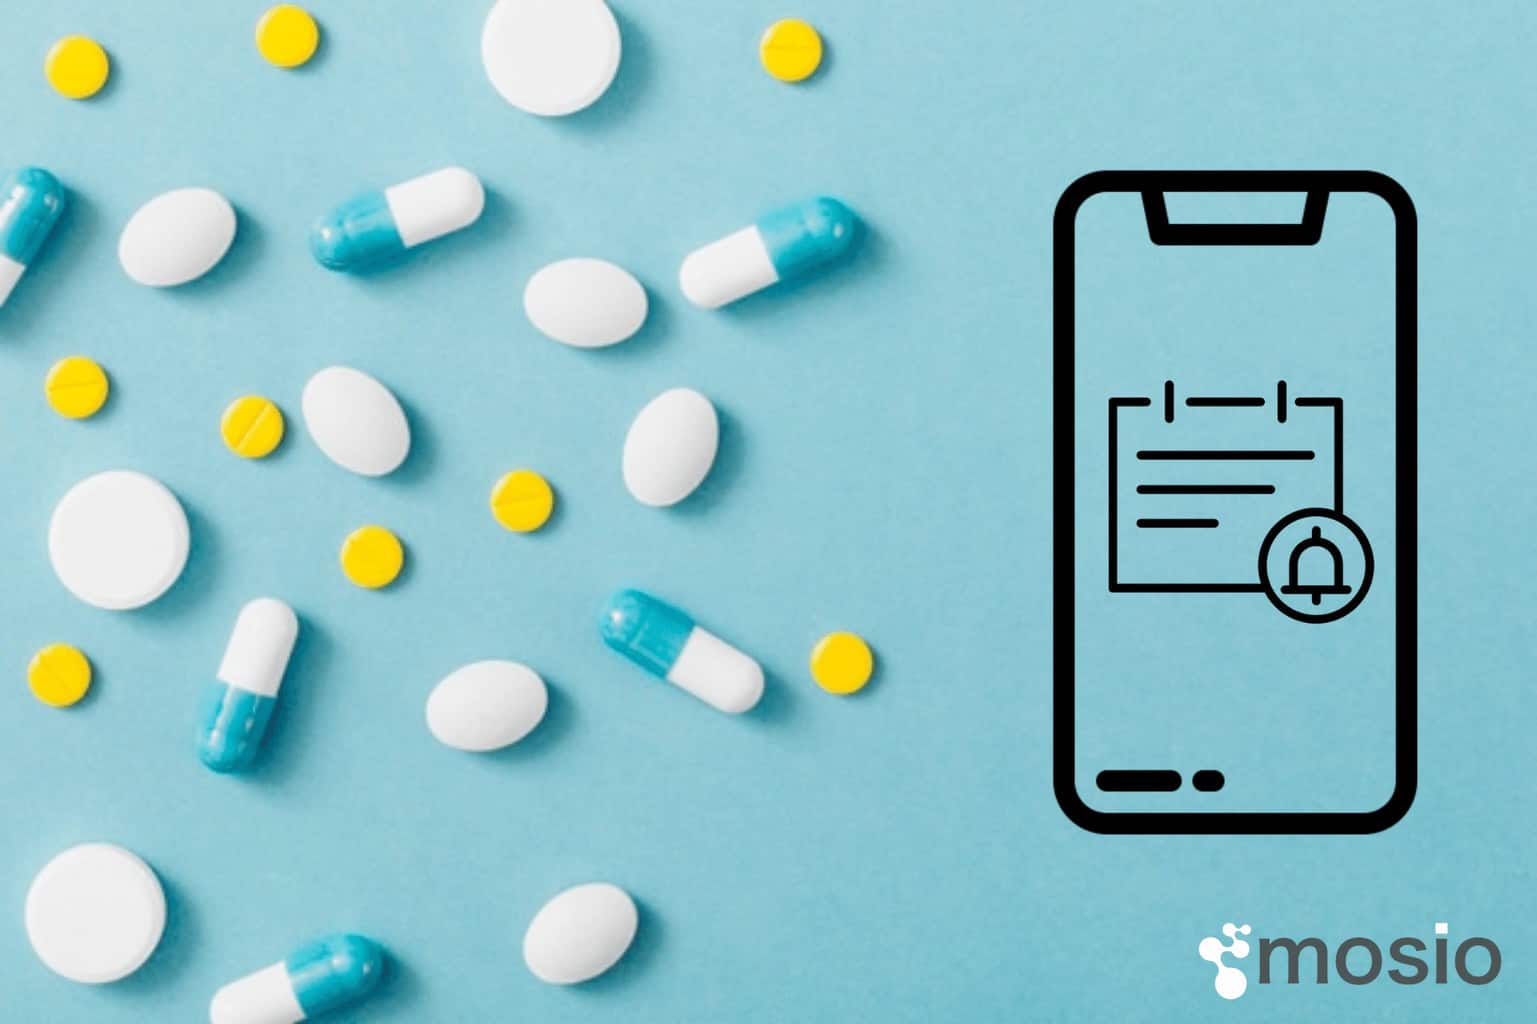 21 Studies Showing the Effectiveness of Text Messaging to Improve Medication Adherence